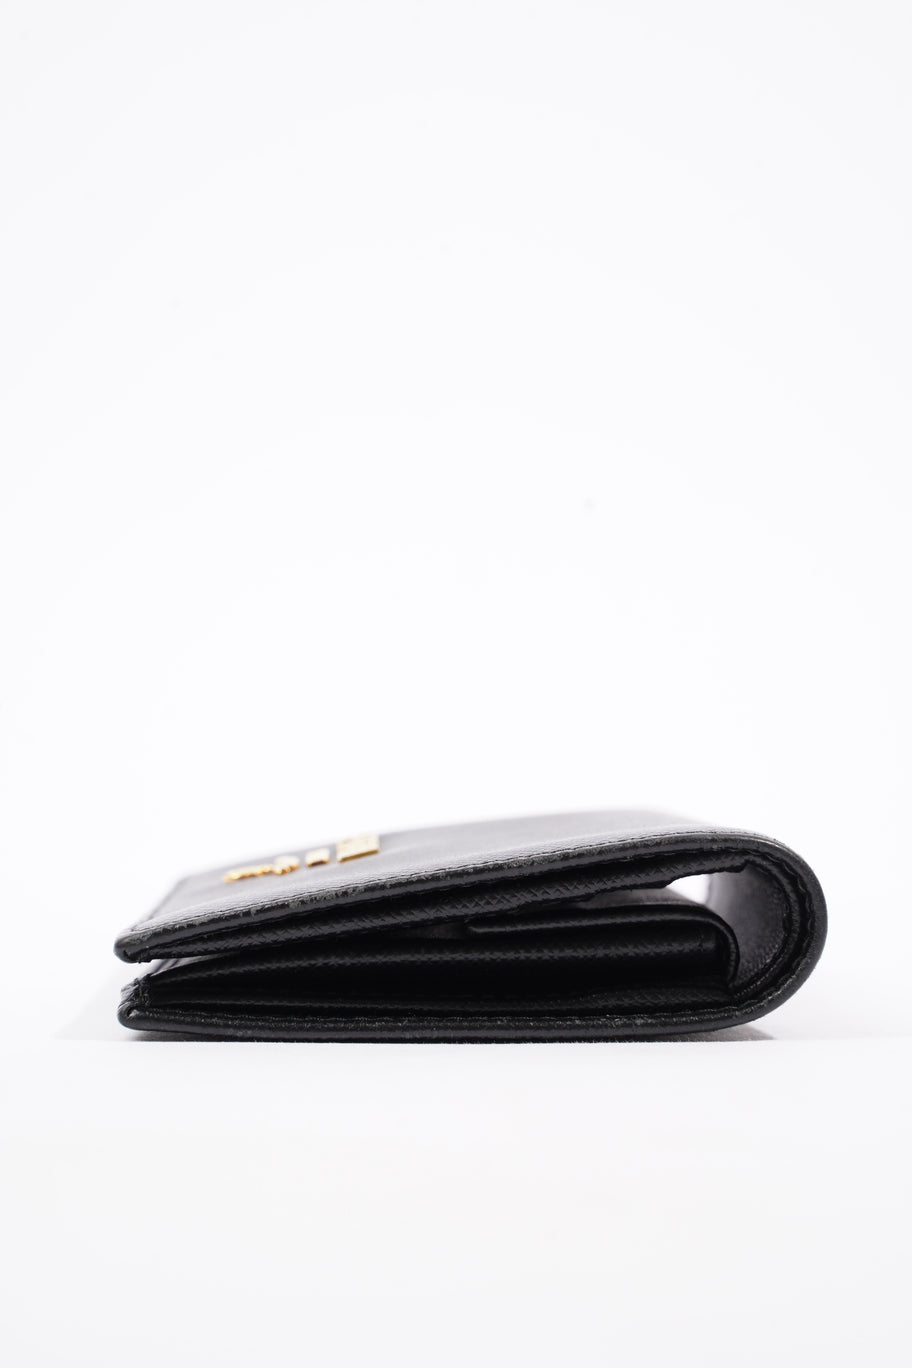 Compact Wallet Black Saffiano Leather Image 2